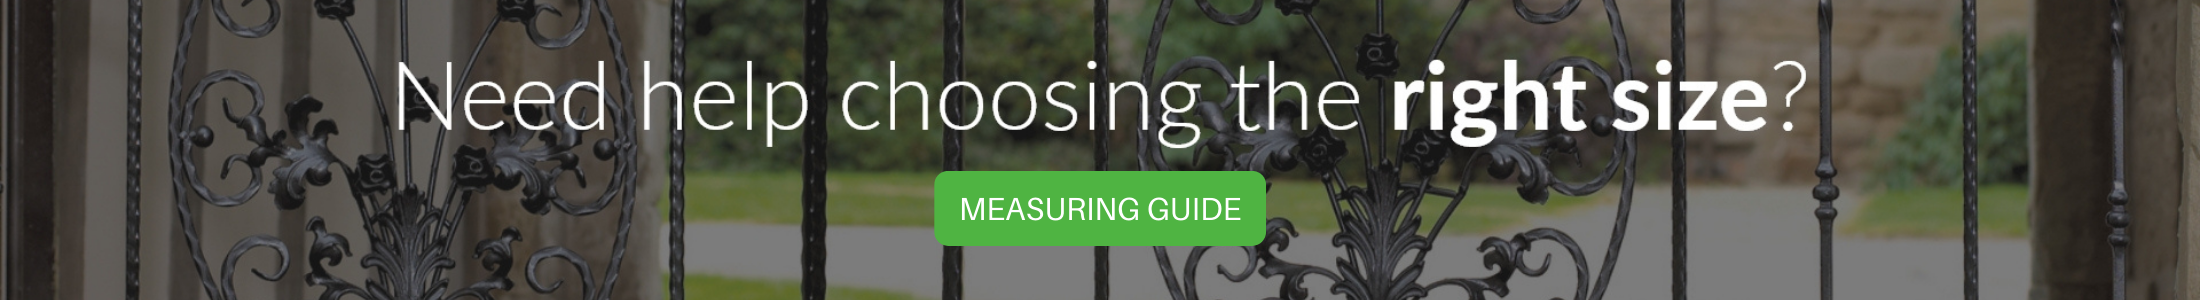 Take a look at the measuring guide if you require help with ordering sizes